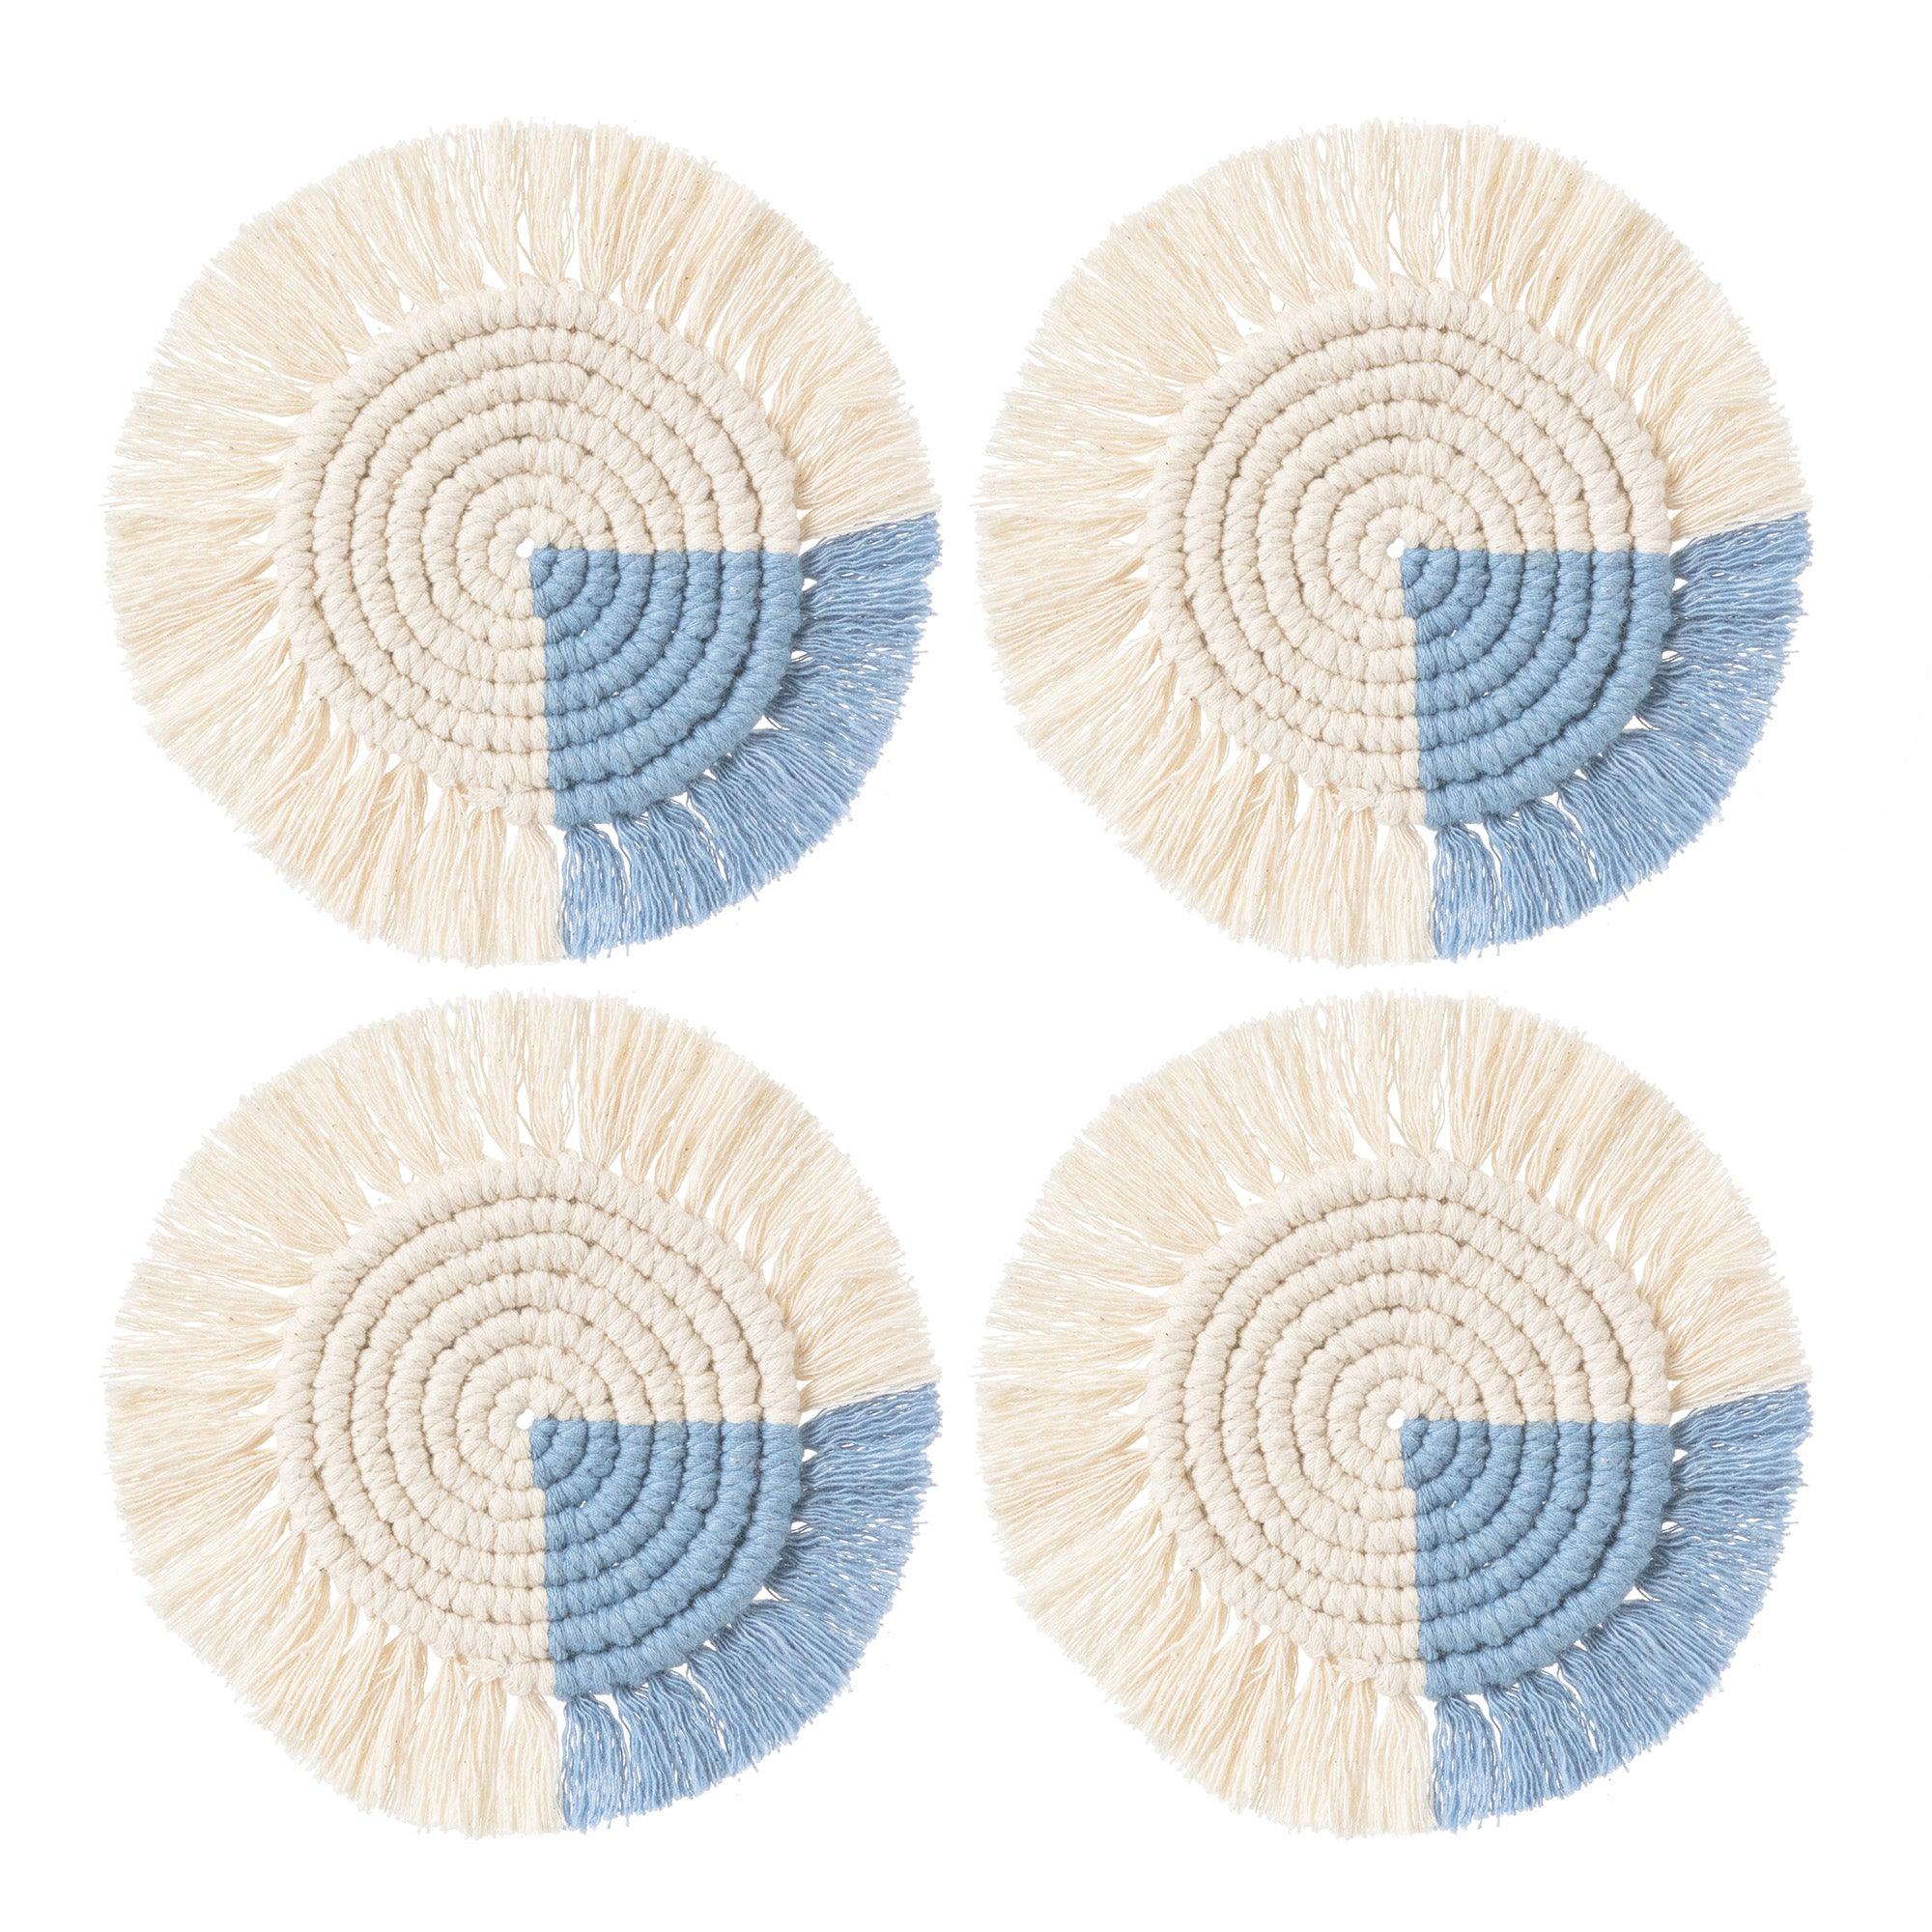 Macrame Coasters in Blues with Fringe - Set of 4 - Life In Alignment